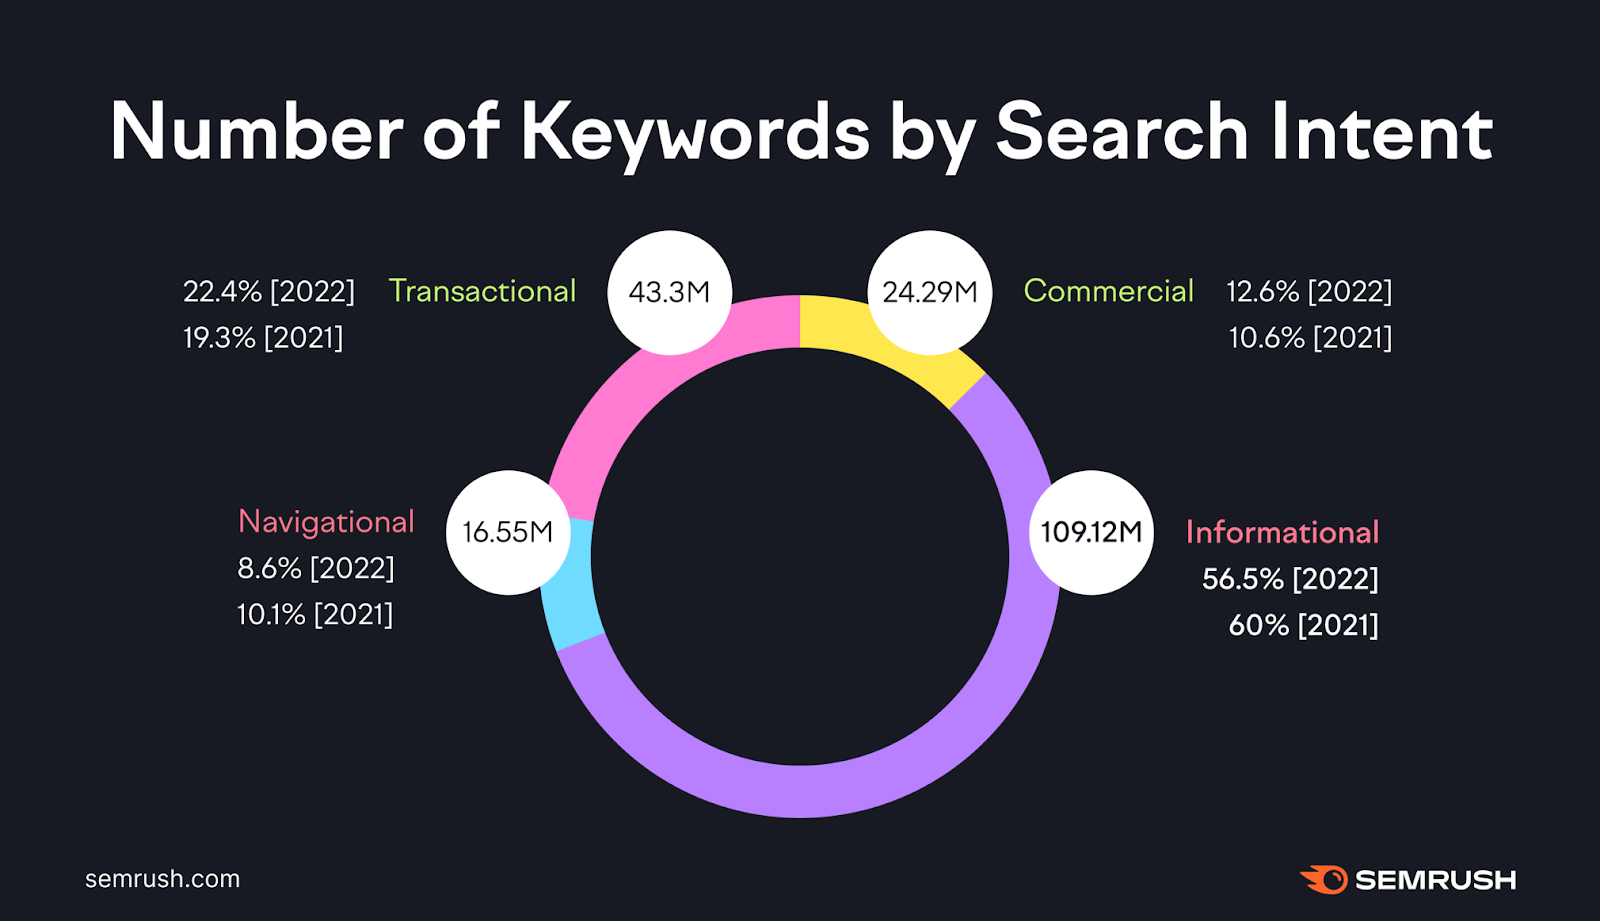 An infographic showing the number of keywords by search intent